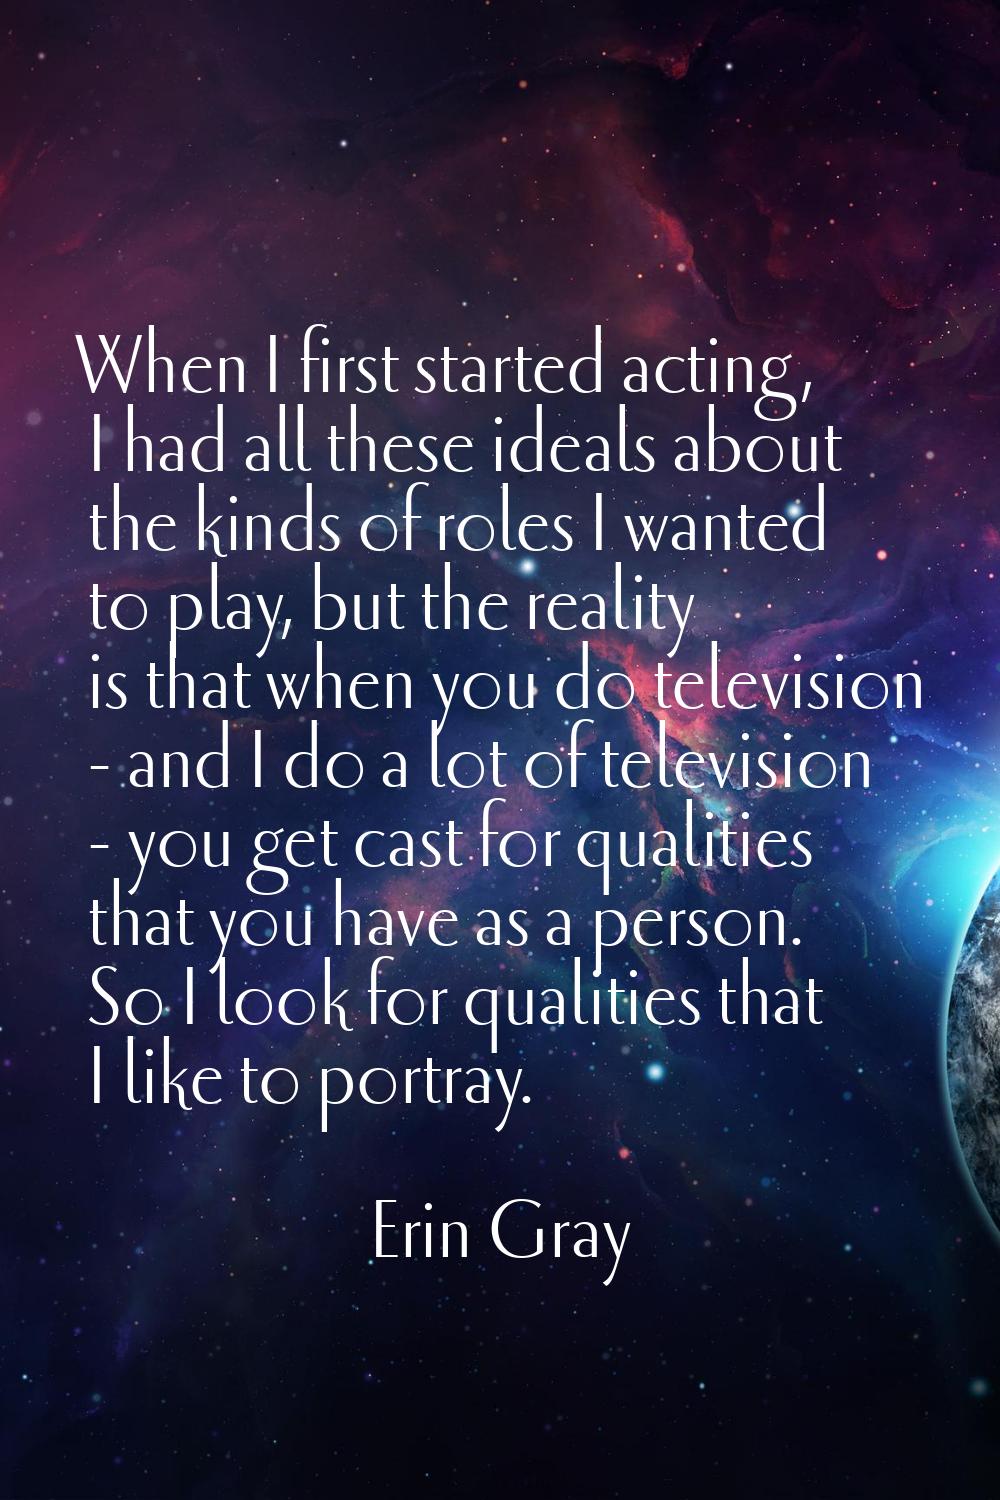 When I first started acting, I had all these ideals about the kinds of roles I wanted to play, but 